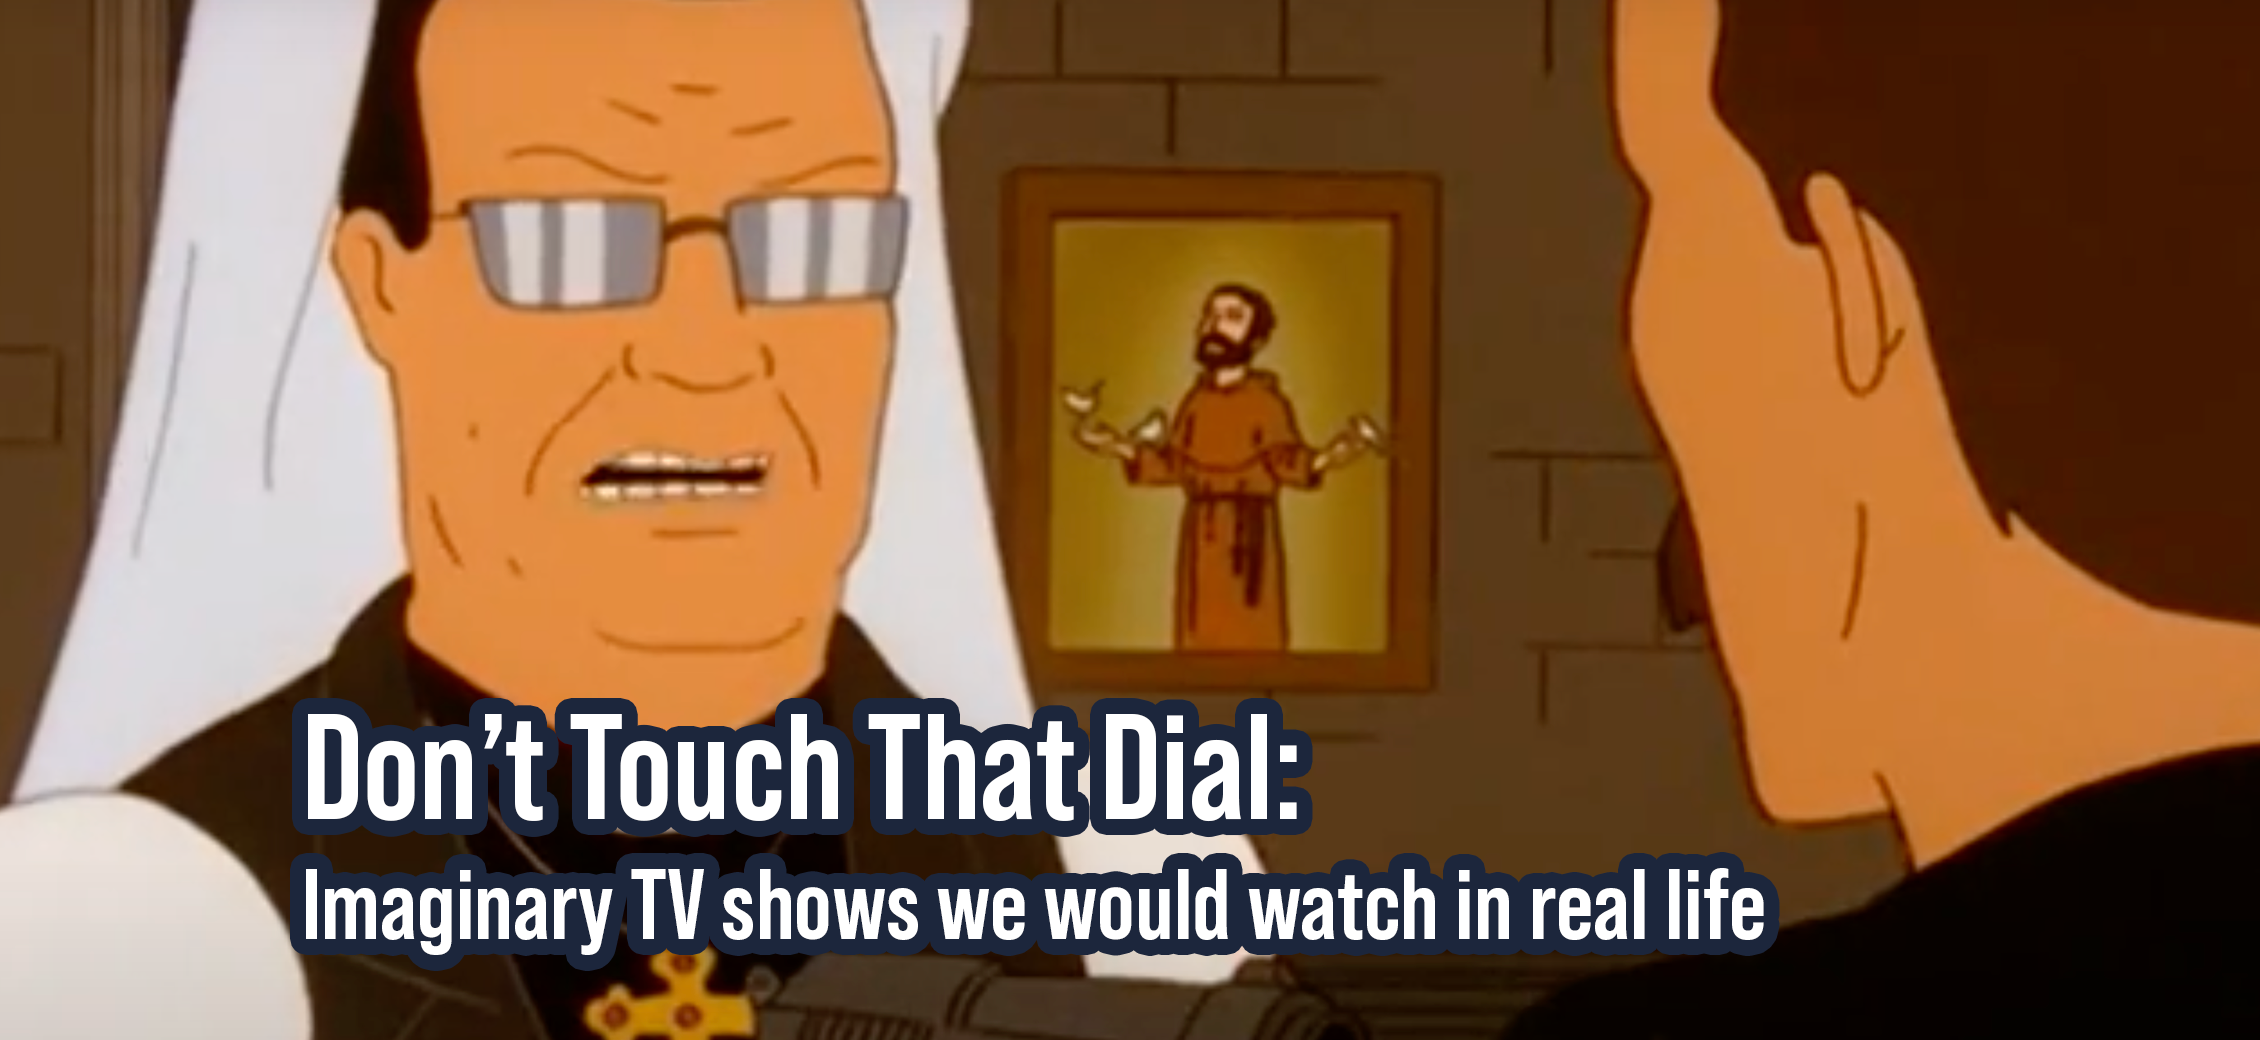 Don’t Touch That Dial: Imaginary TV shows we would watch in real life